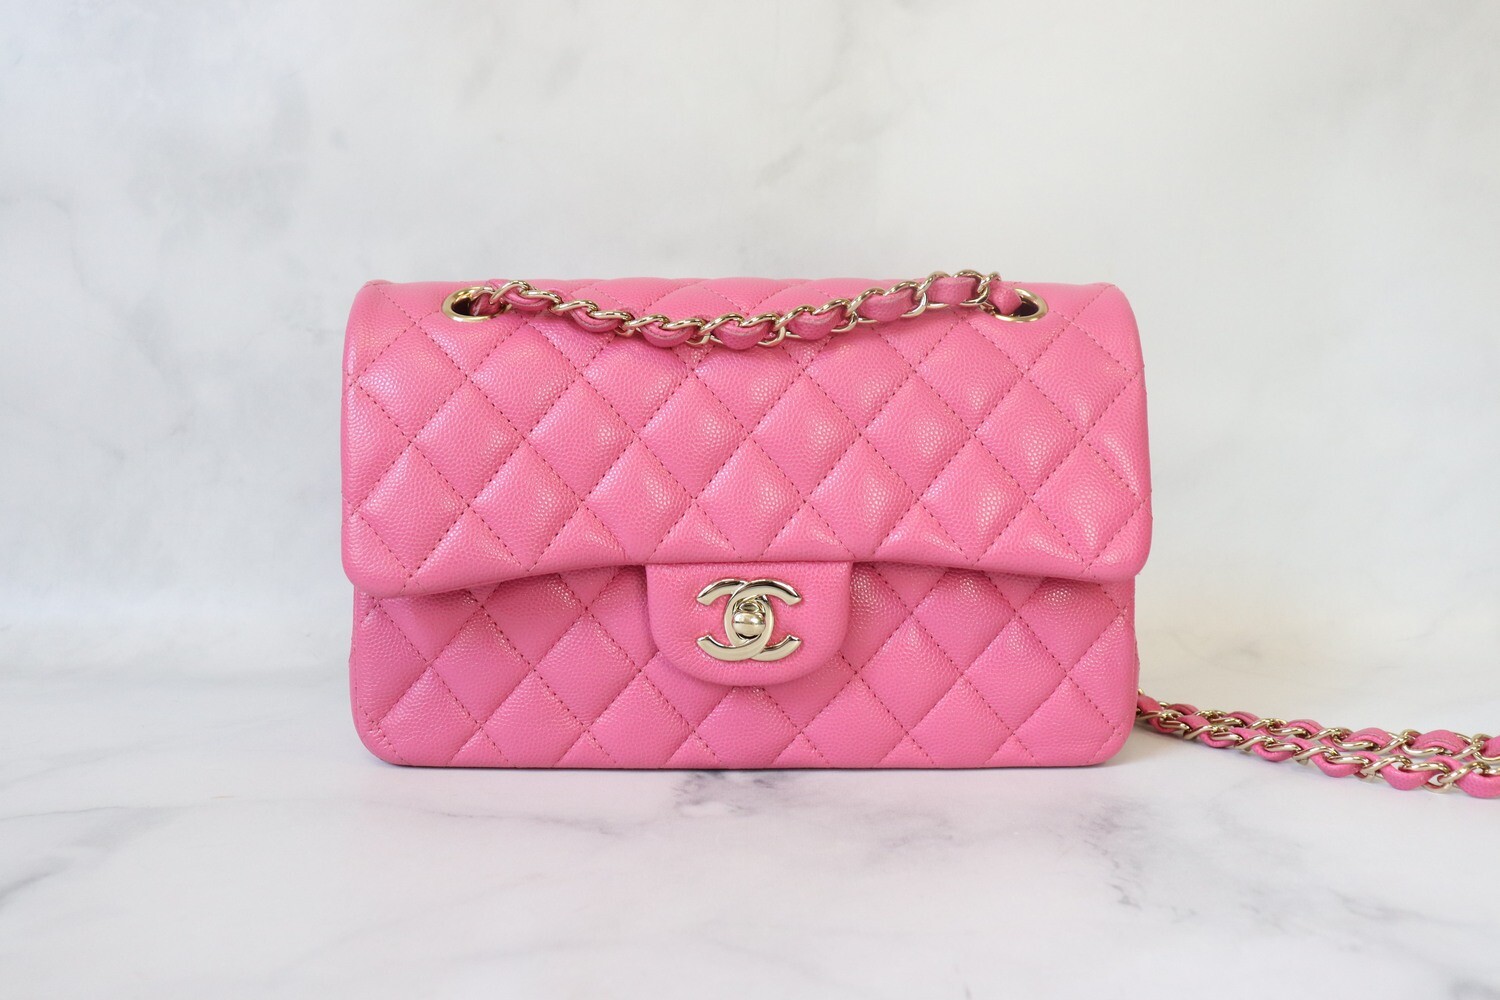 Chanel Classic Small Double Flap, 21C Pink Caviar Leather, Shiny Gold  Hardware, Preowned in Box (with black dustbag) - Julia Rose Boston